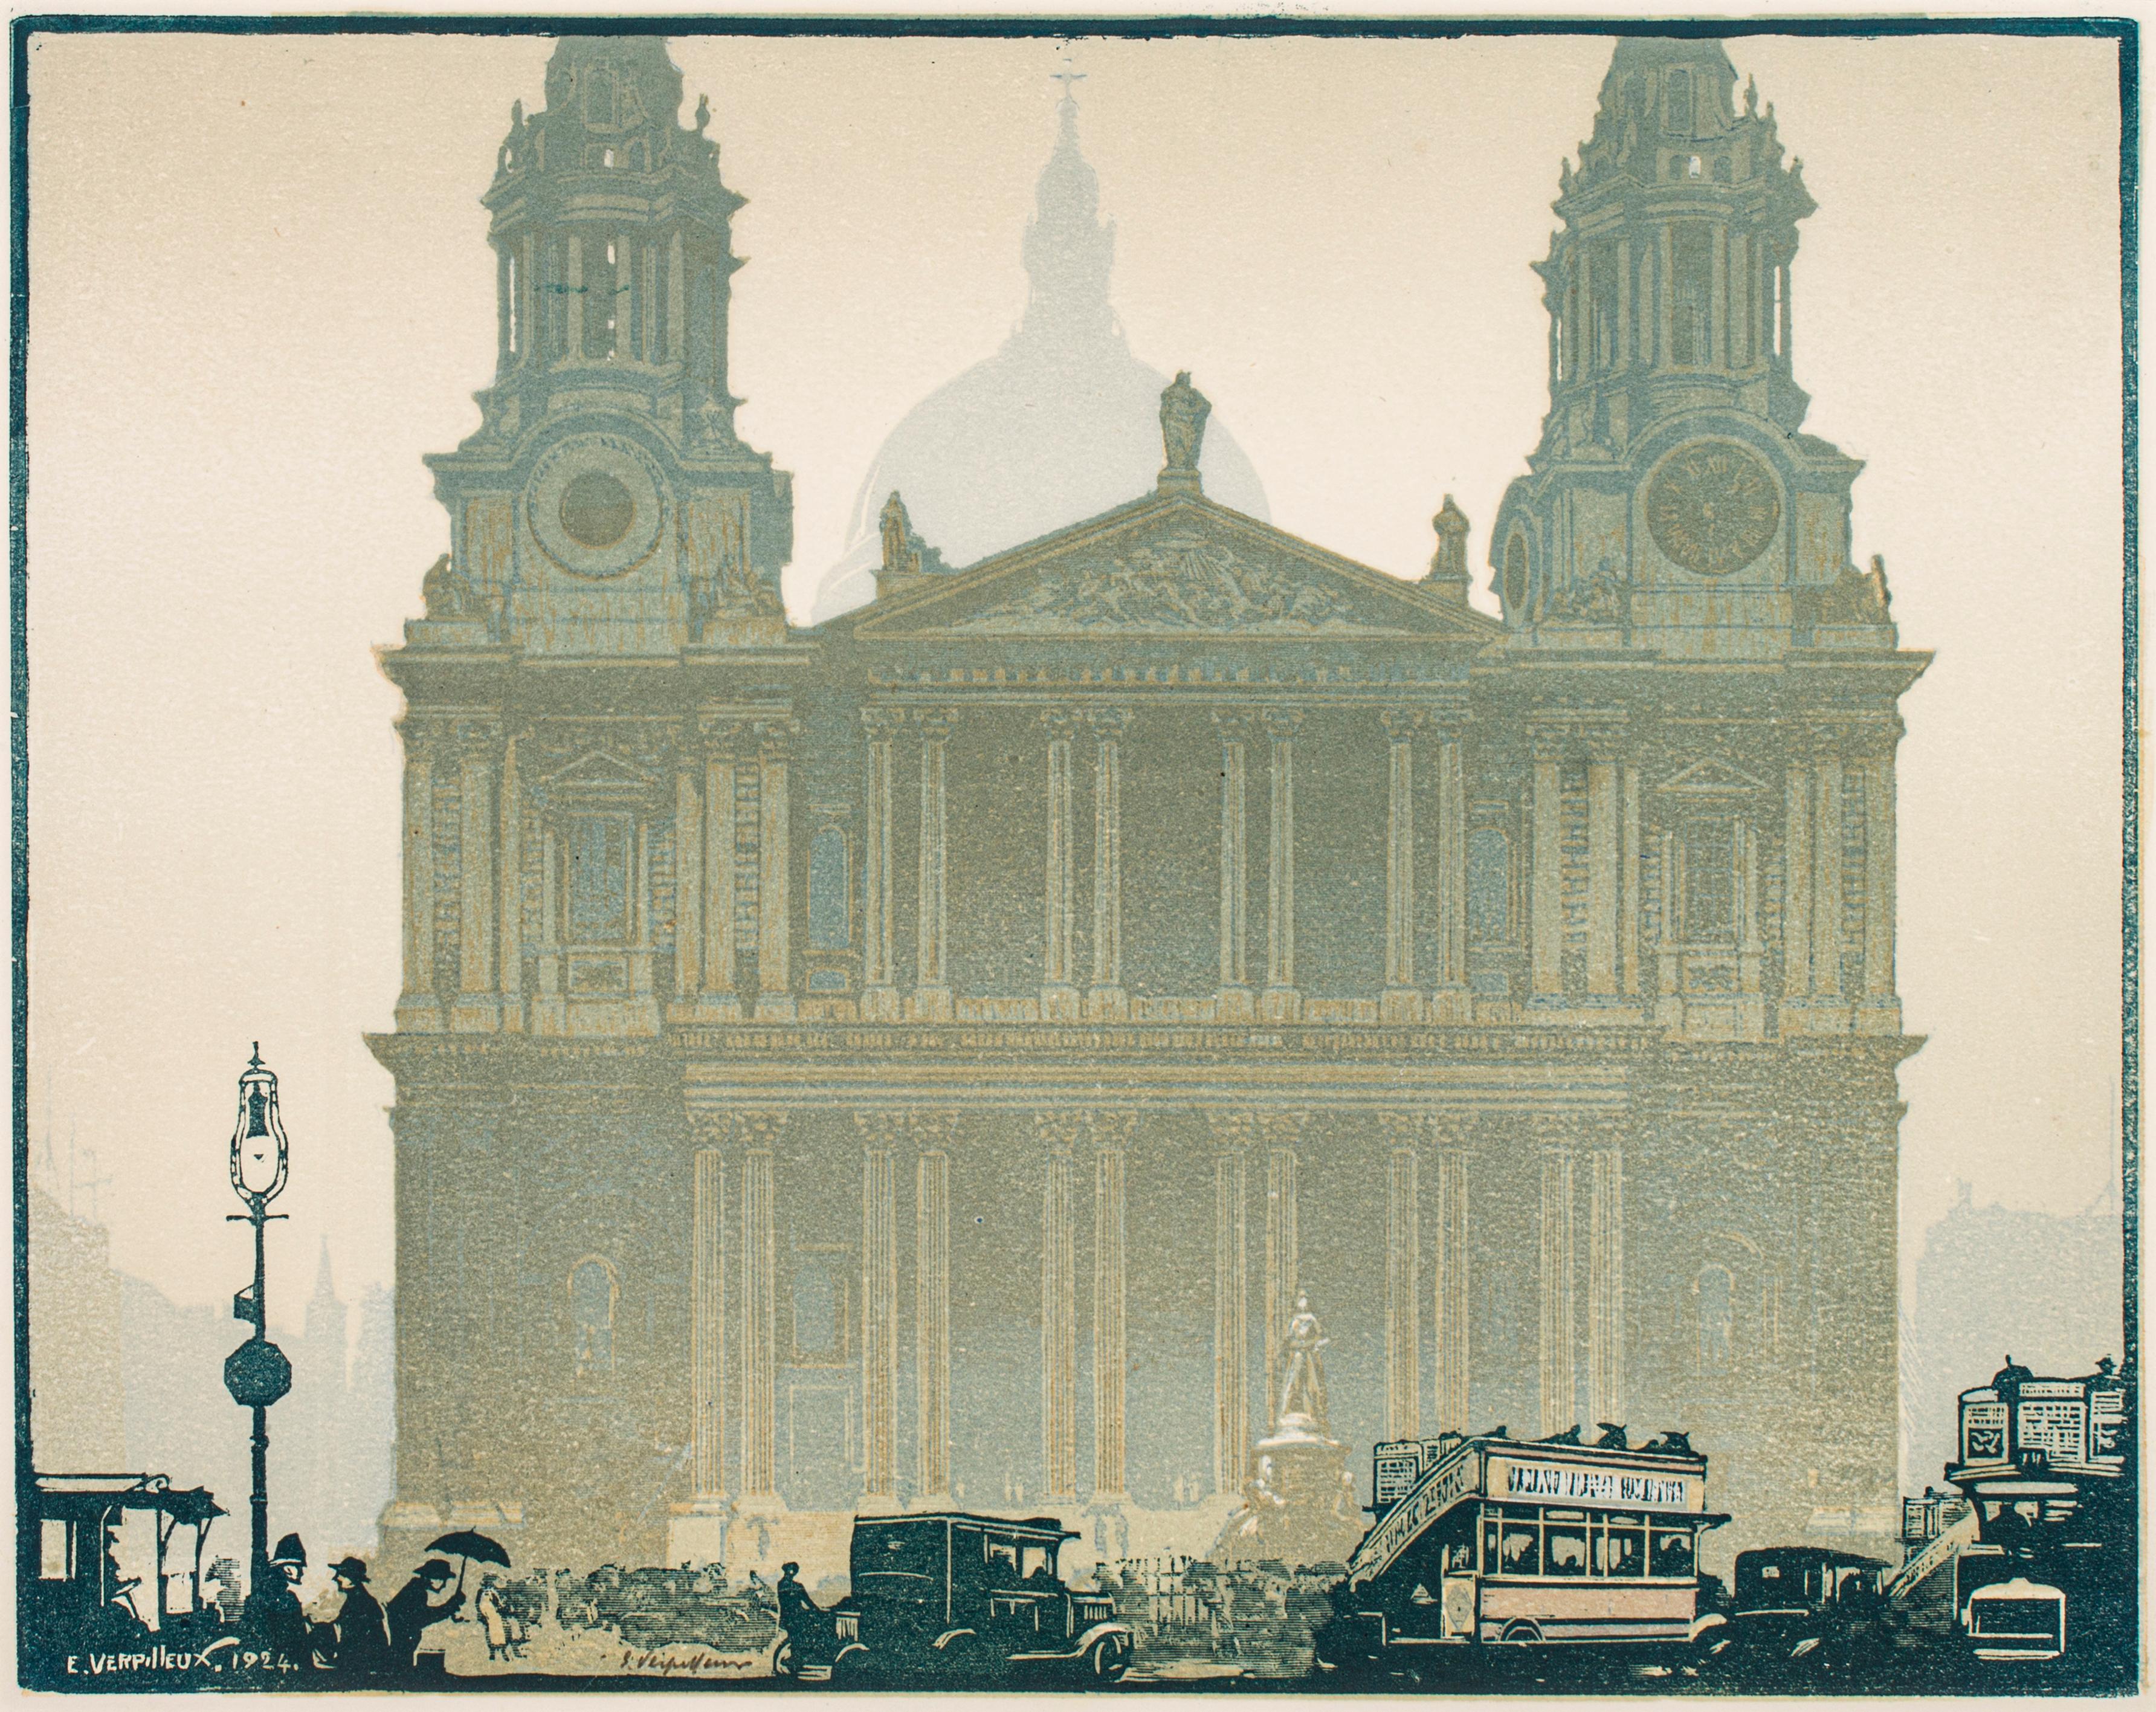 Emile Antoine Verpilleux, 1888-1964
St. Paul’s Cathedral: Rainy Day, 1924
Original woodcut, printed in colors
14 x 18 inches
Signed in pencil